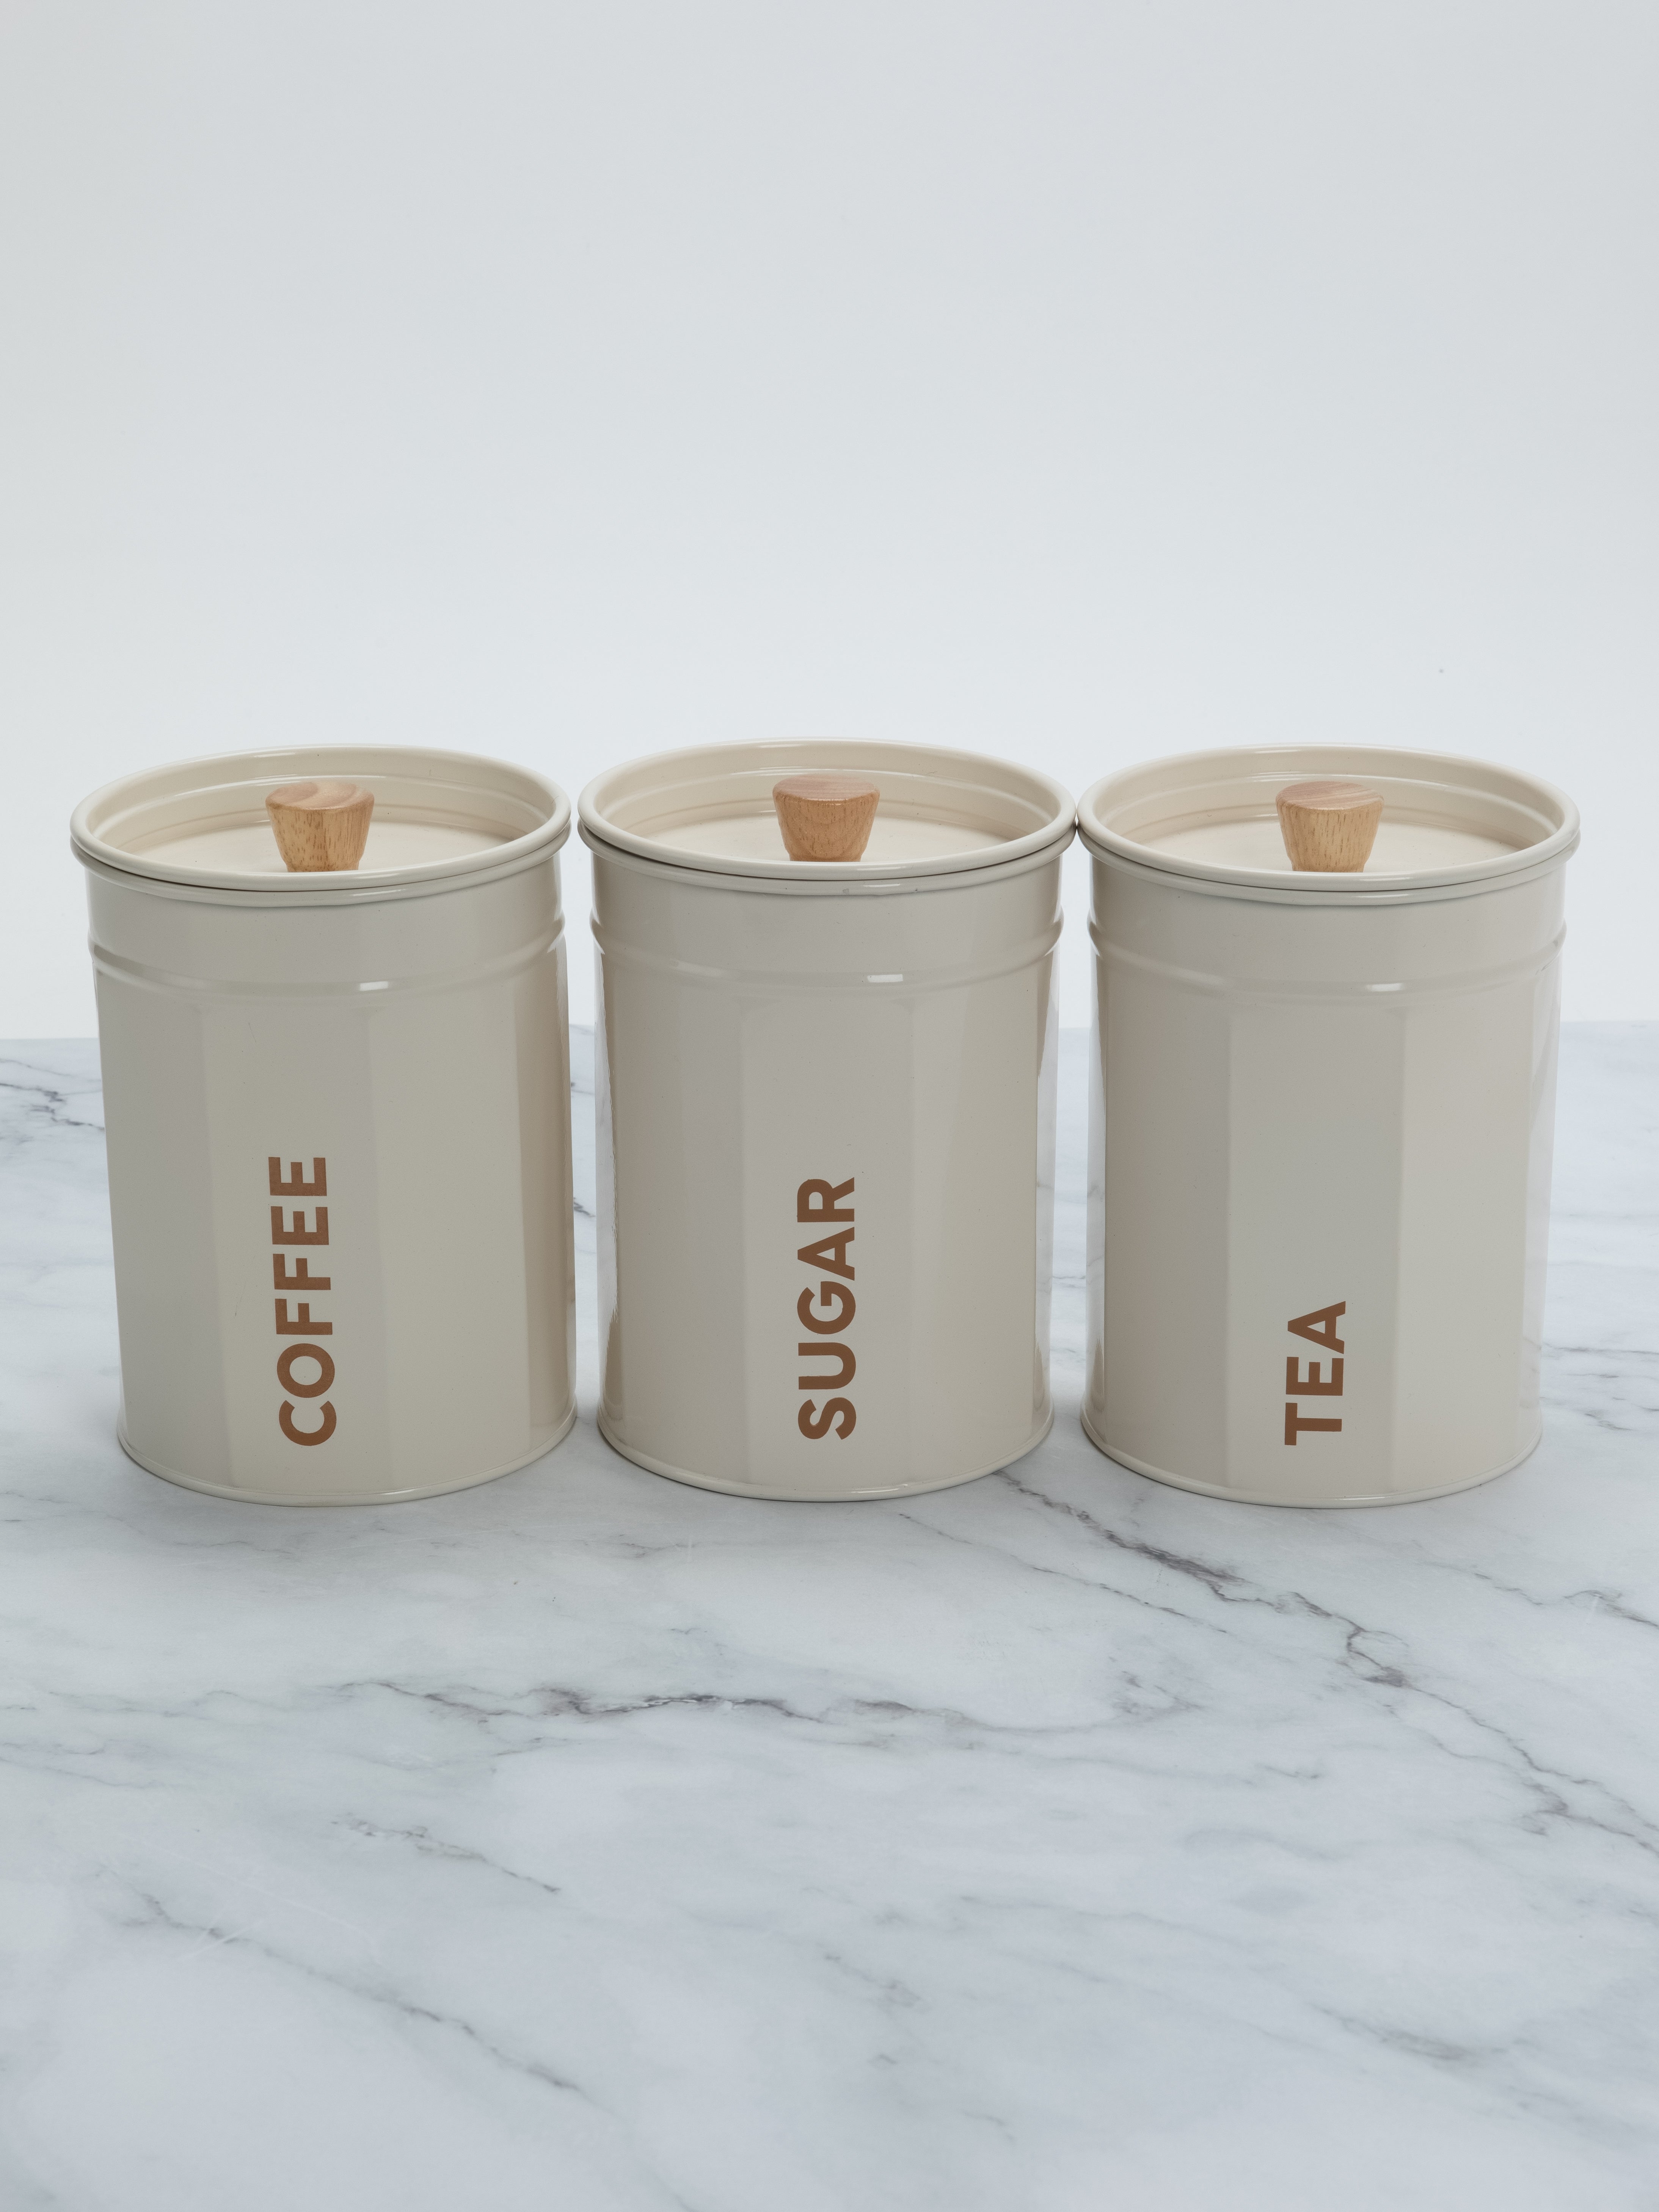 Coffee Storage Canister